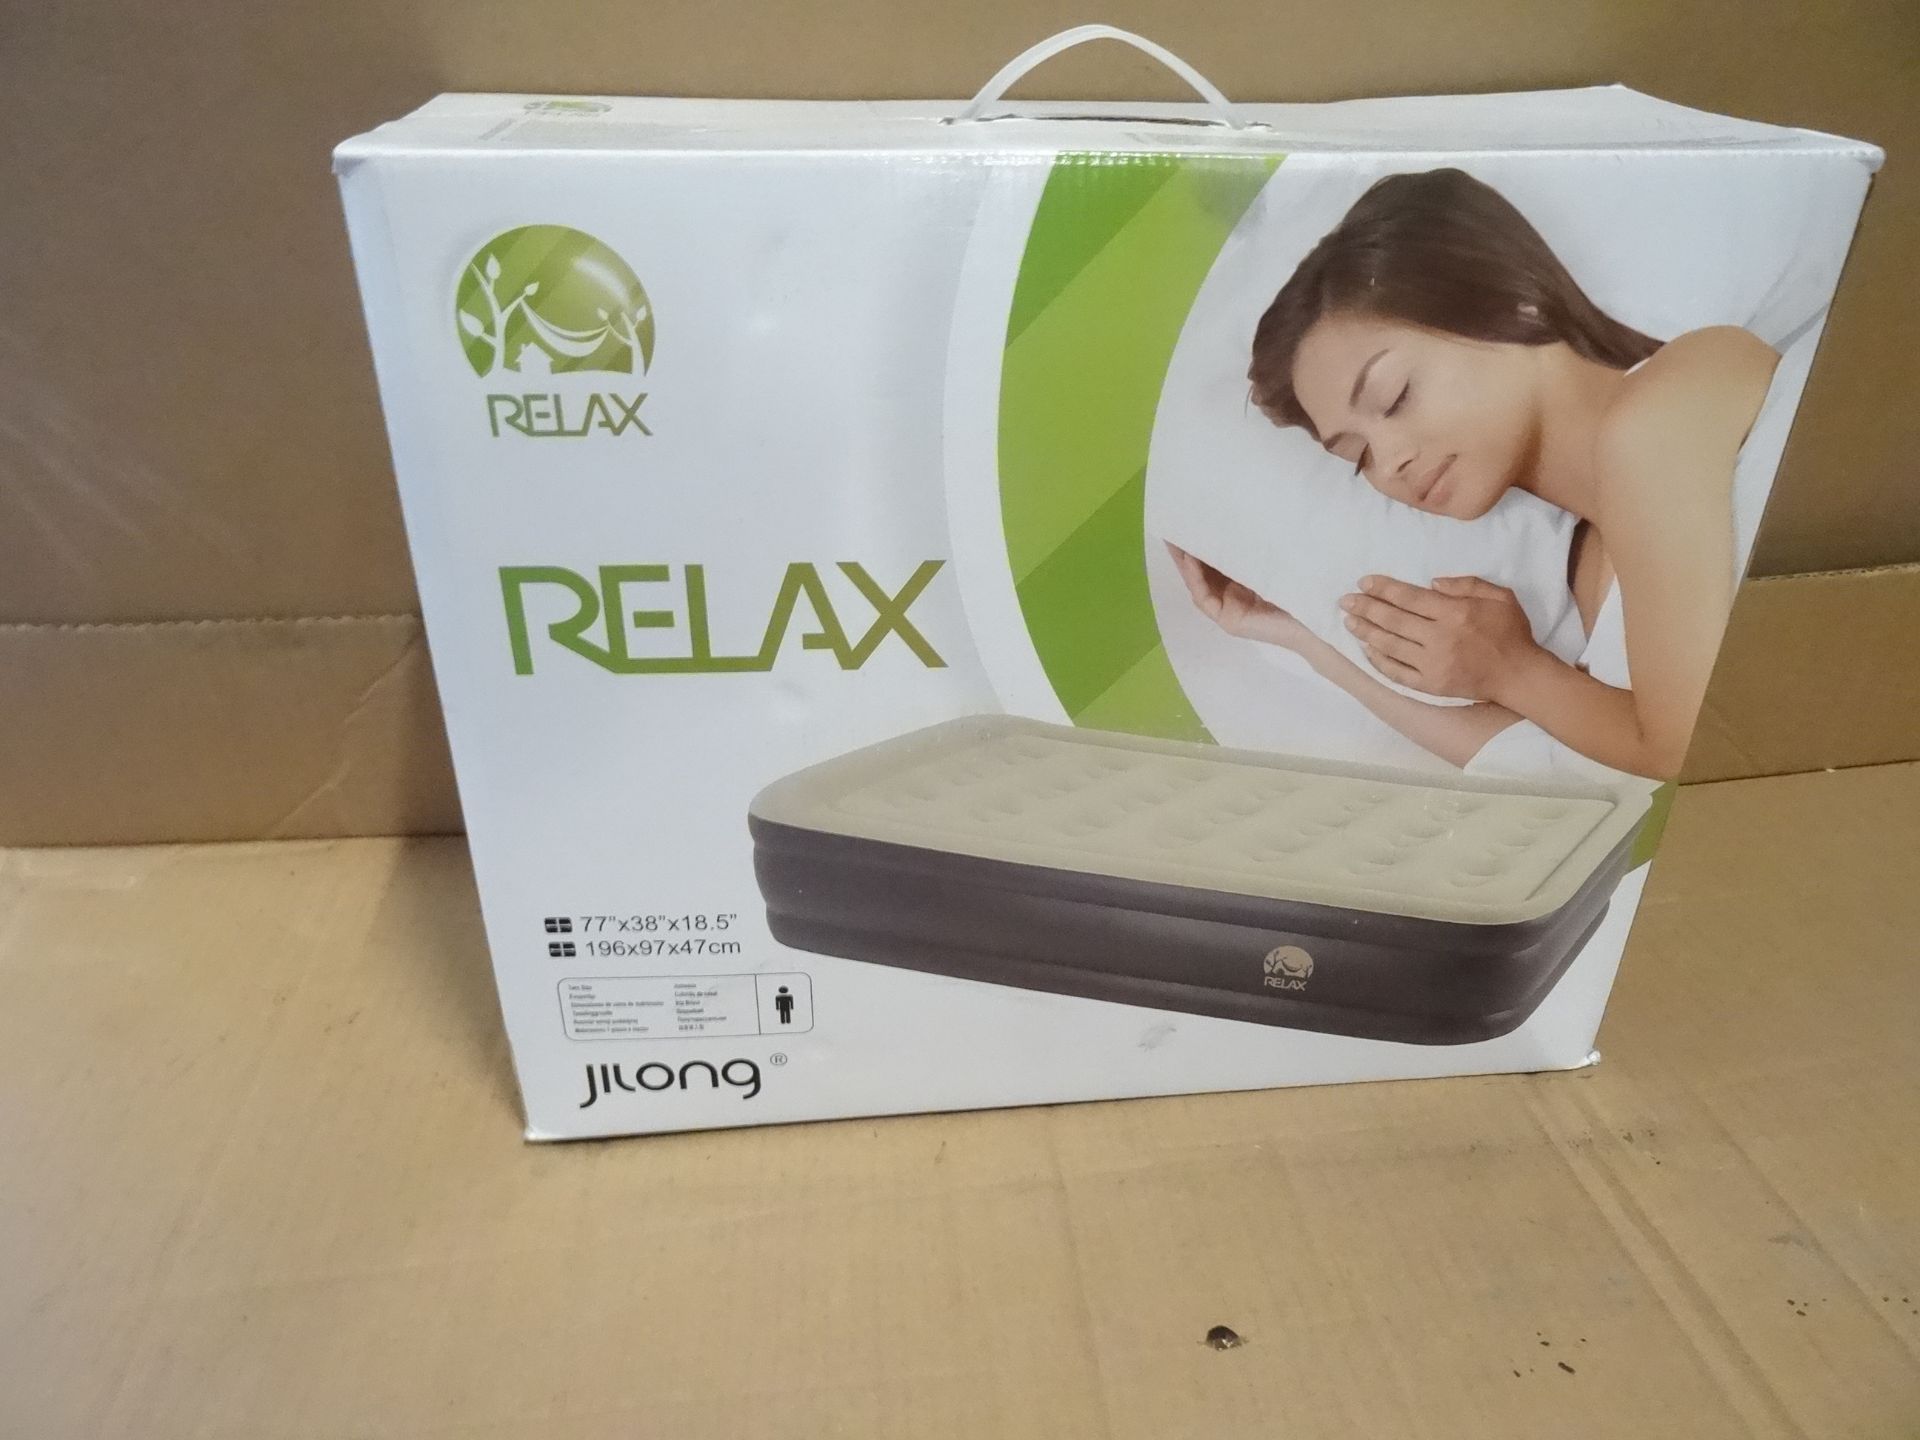 1 x Jilong High Raised Air Bed with Built in Pump. Approx Retail value £70. High quality. Brand